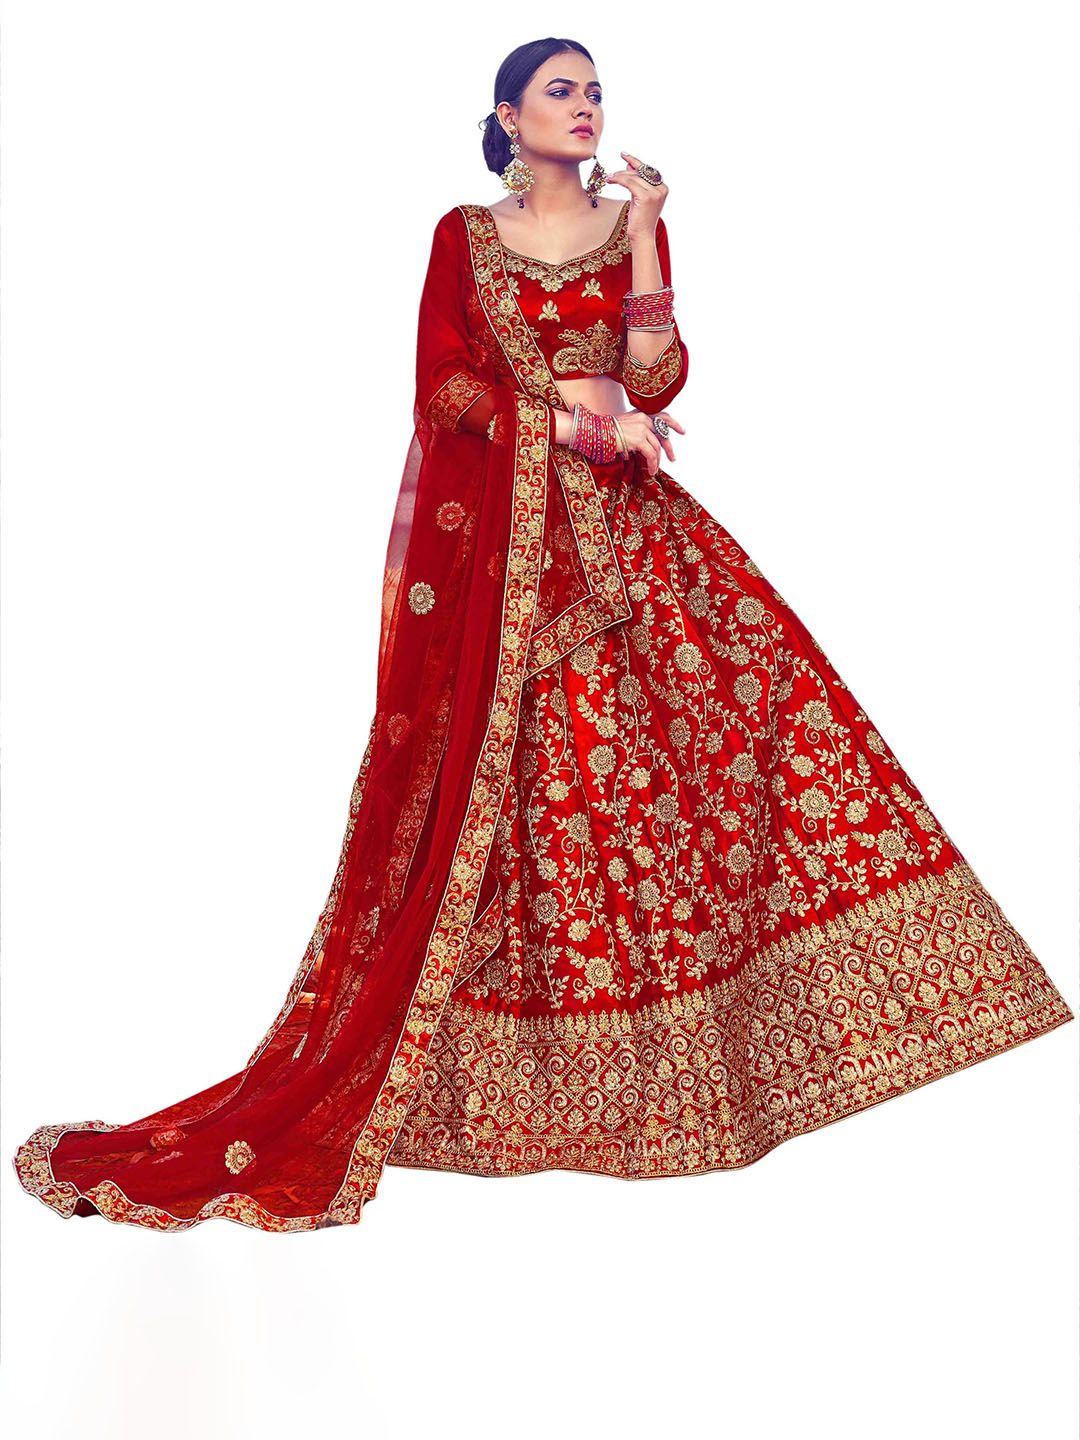 MANVAA Embroidered Silk Semi-Stitched Lehenga & Unstitched Blouse With Dupatta Price in India